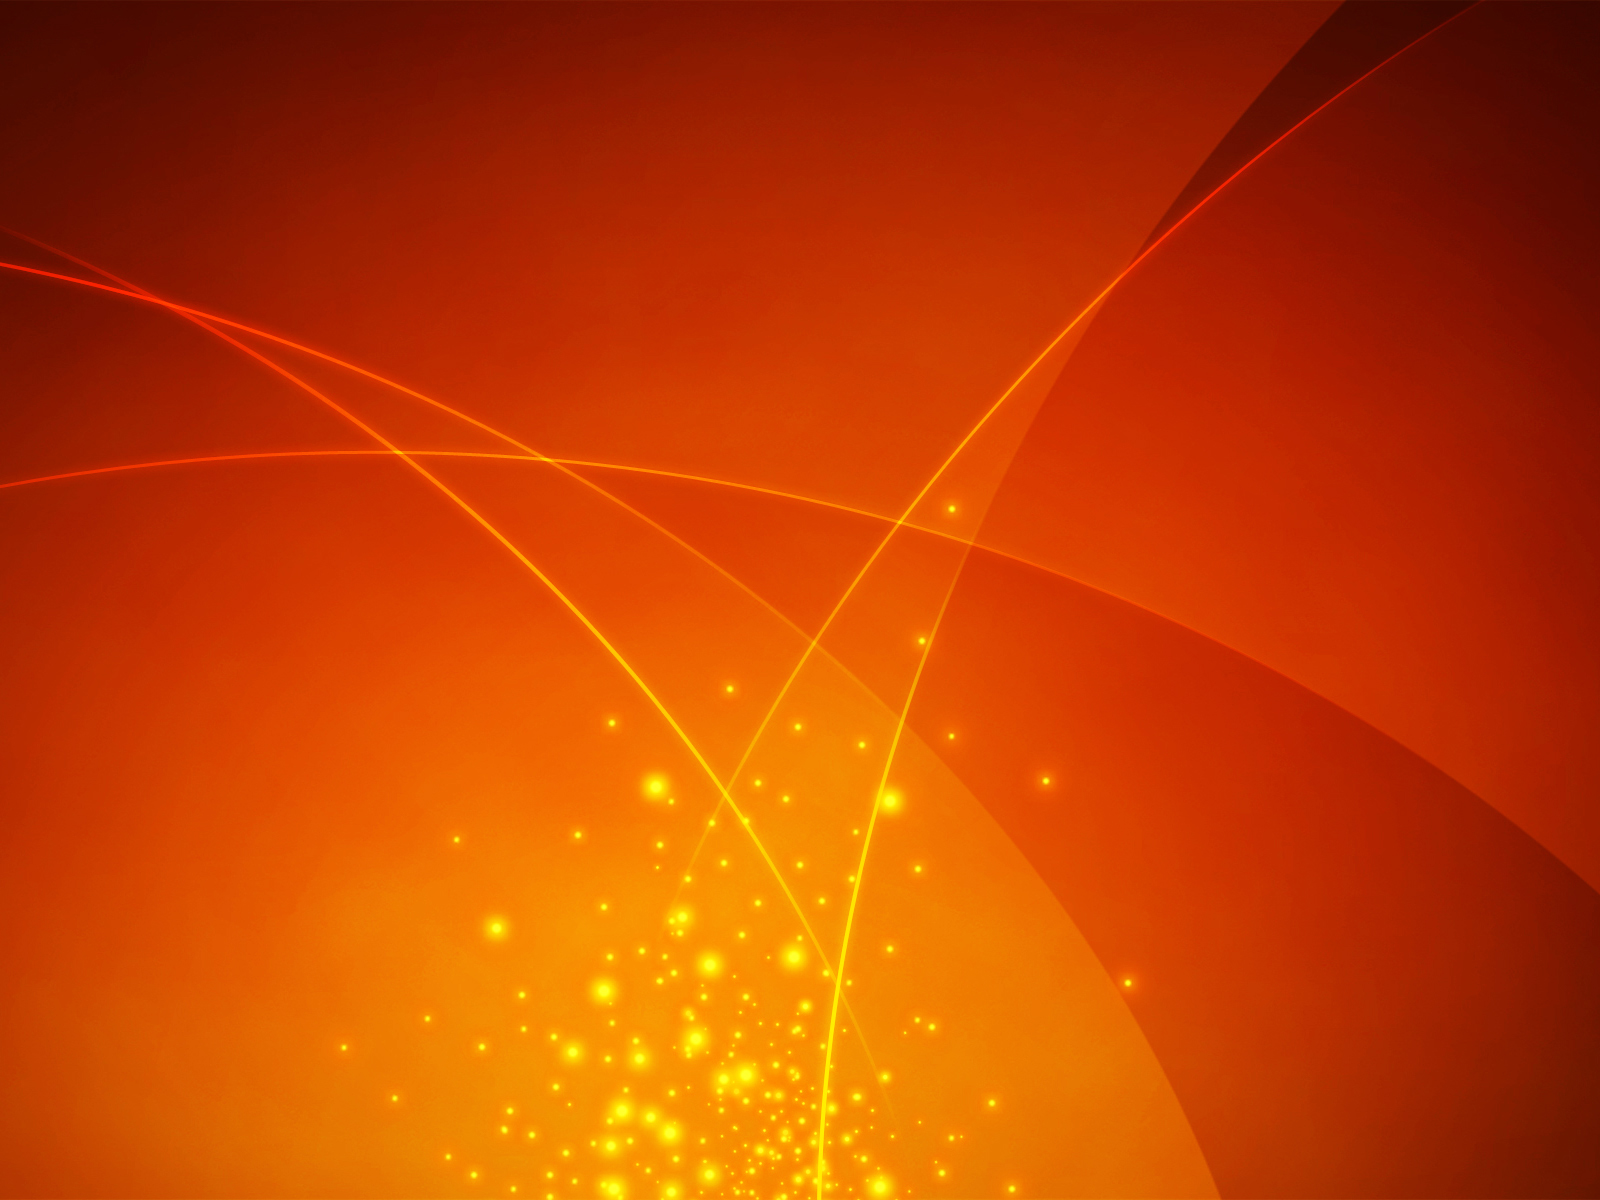 Orange Abstract Design Backgrounds   PPT Backgrounds Templates